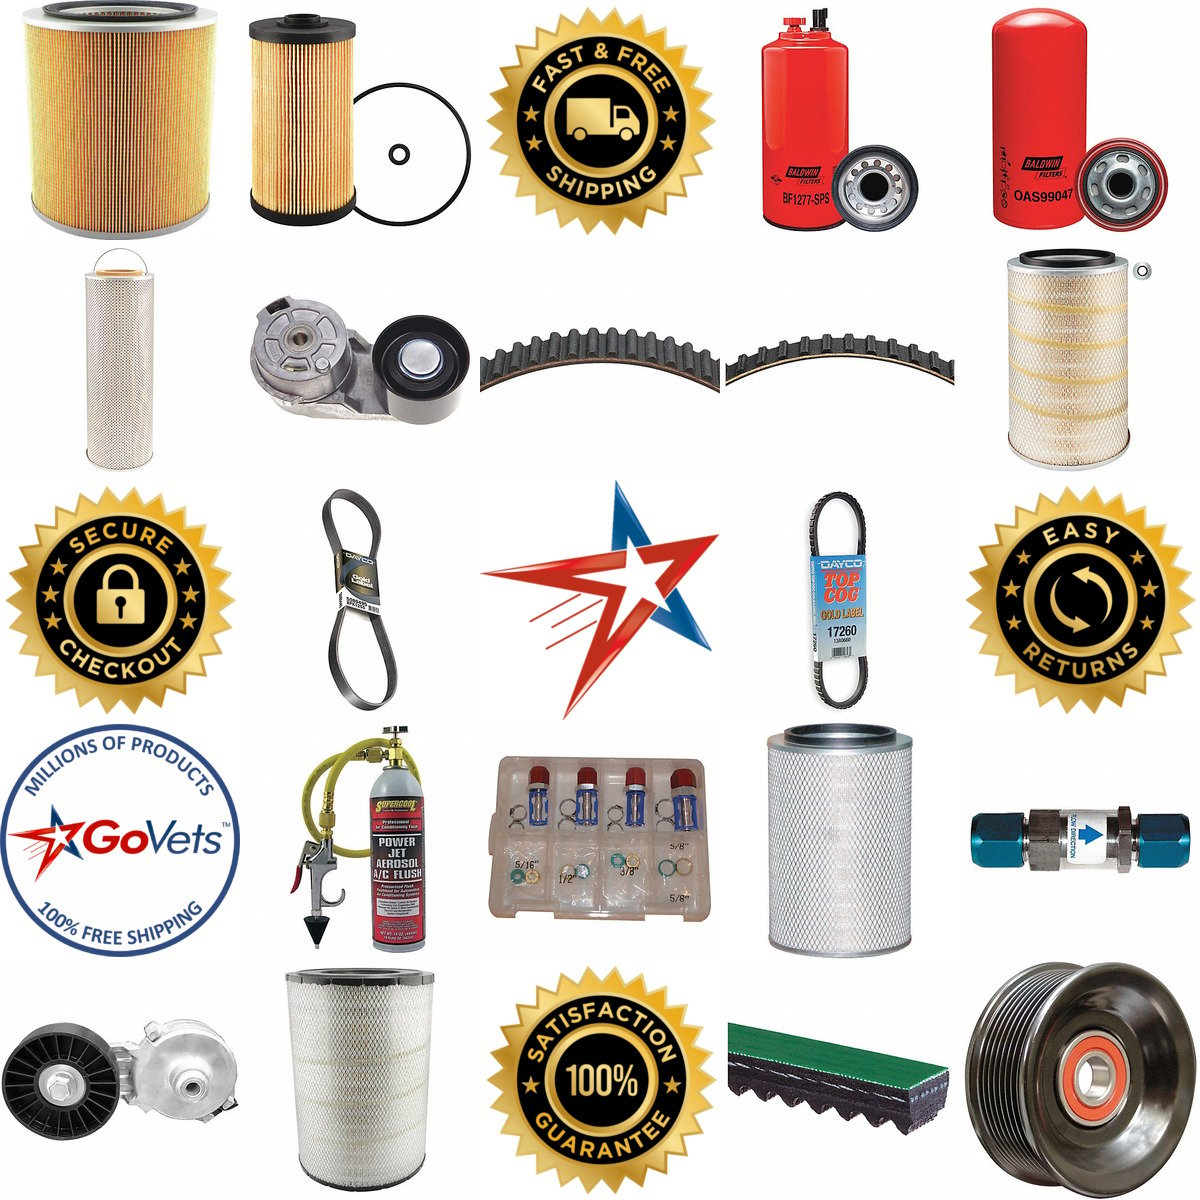 A selection of Automotive Mechanical products on GoVets